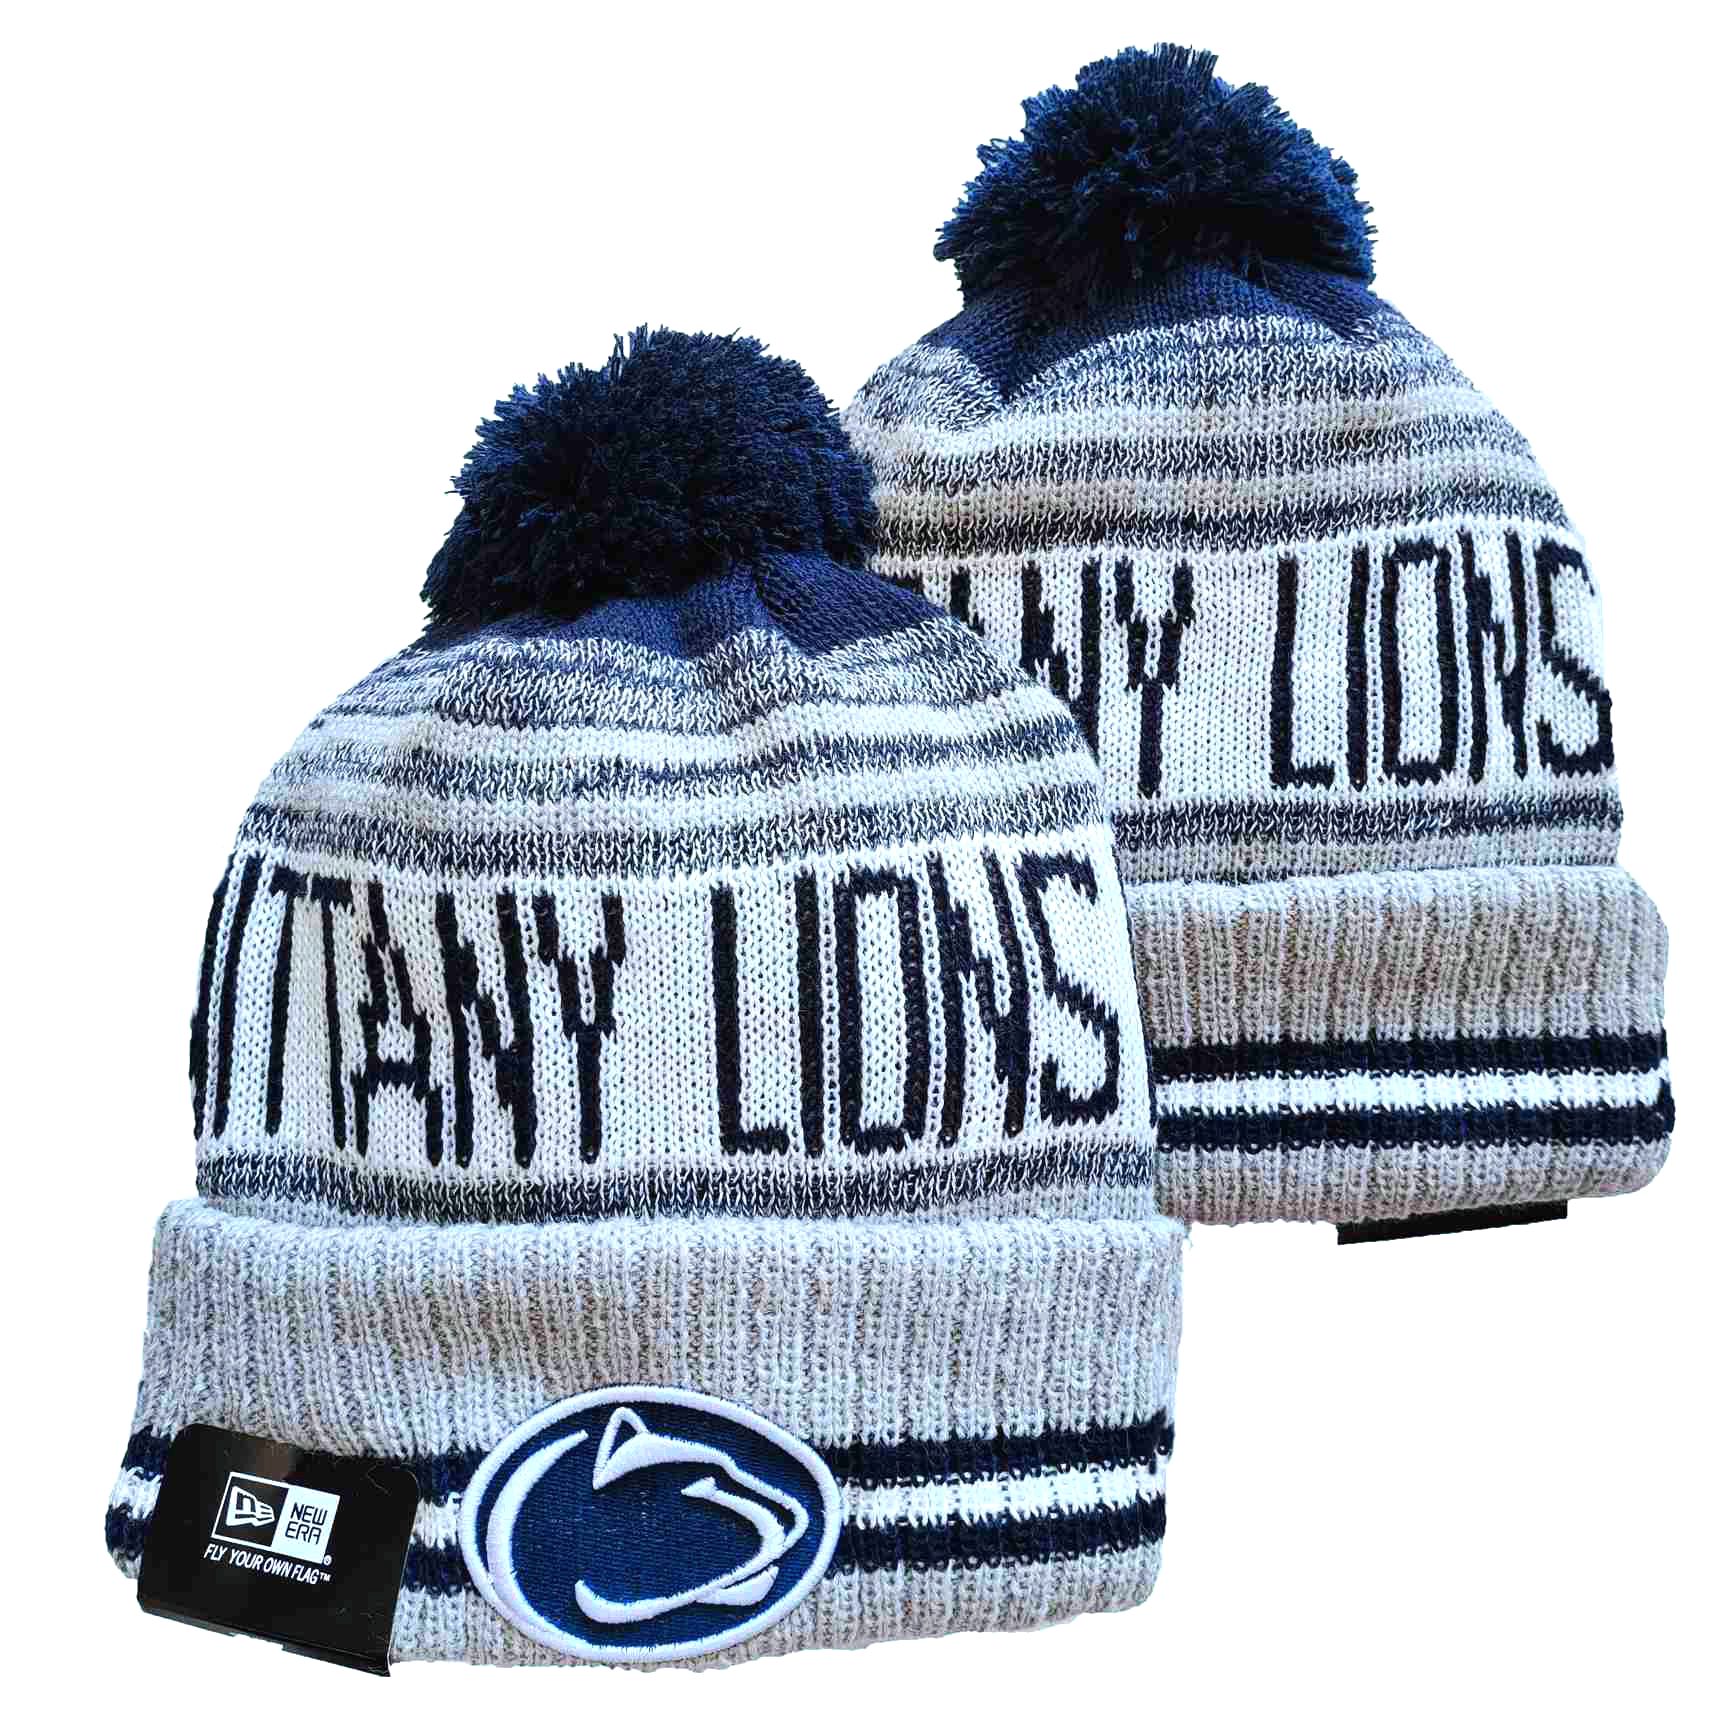 NCAA Penn State Nittany Lions Beanies Knit Hats-YD405